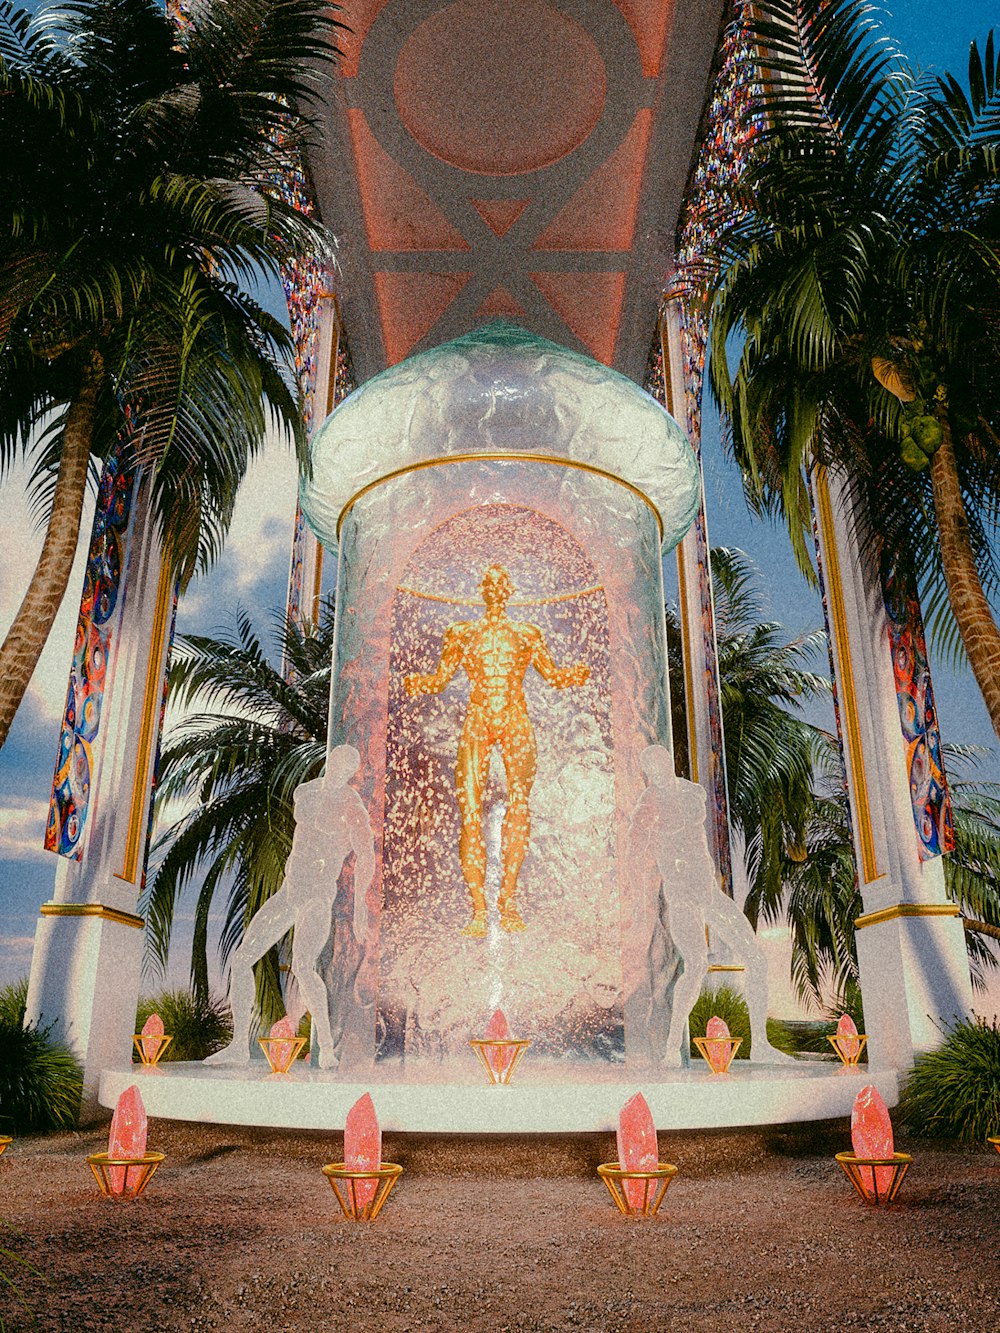 a statue of a man surrounded by palm trees